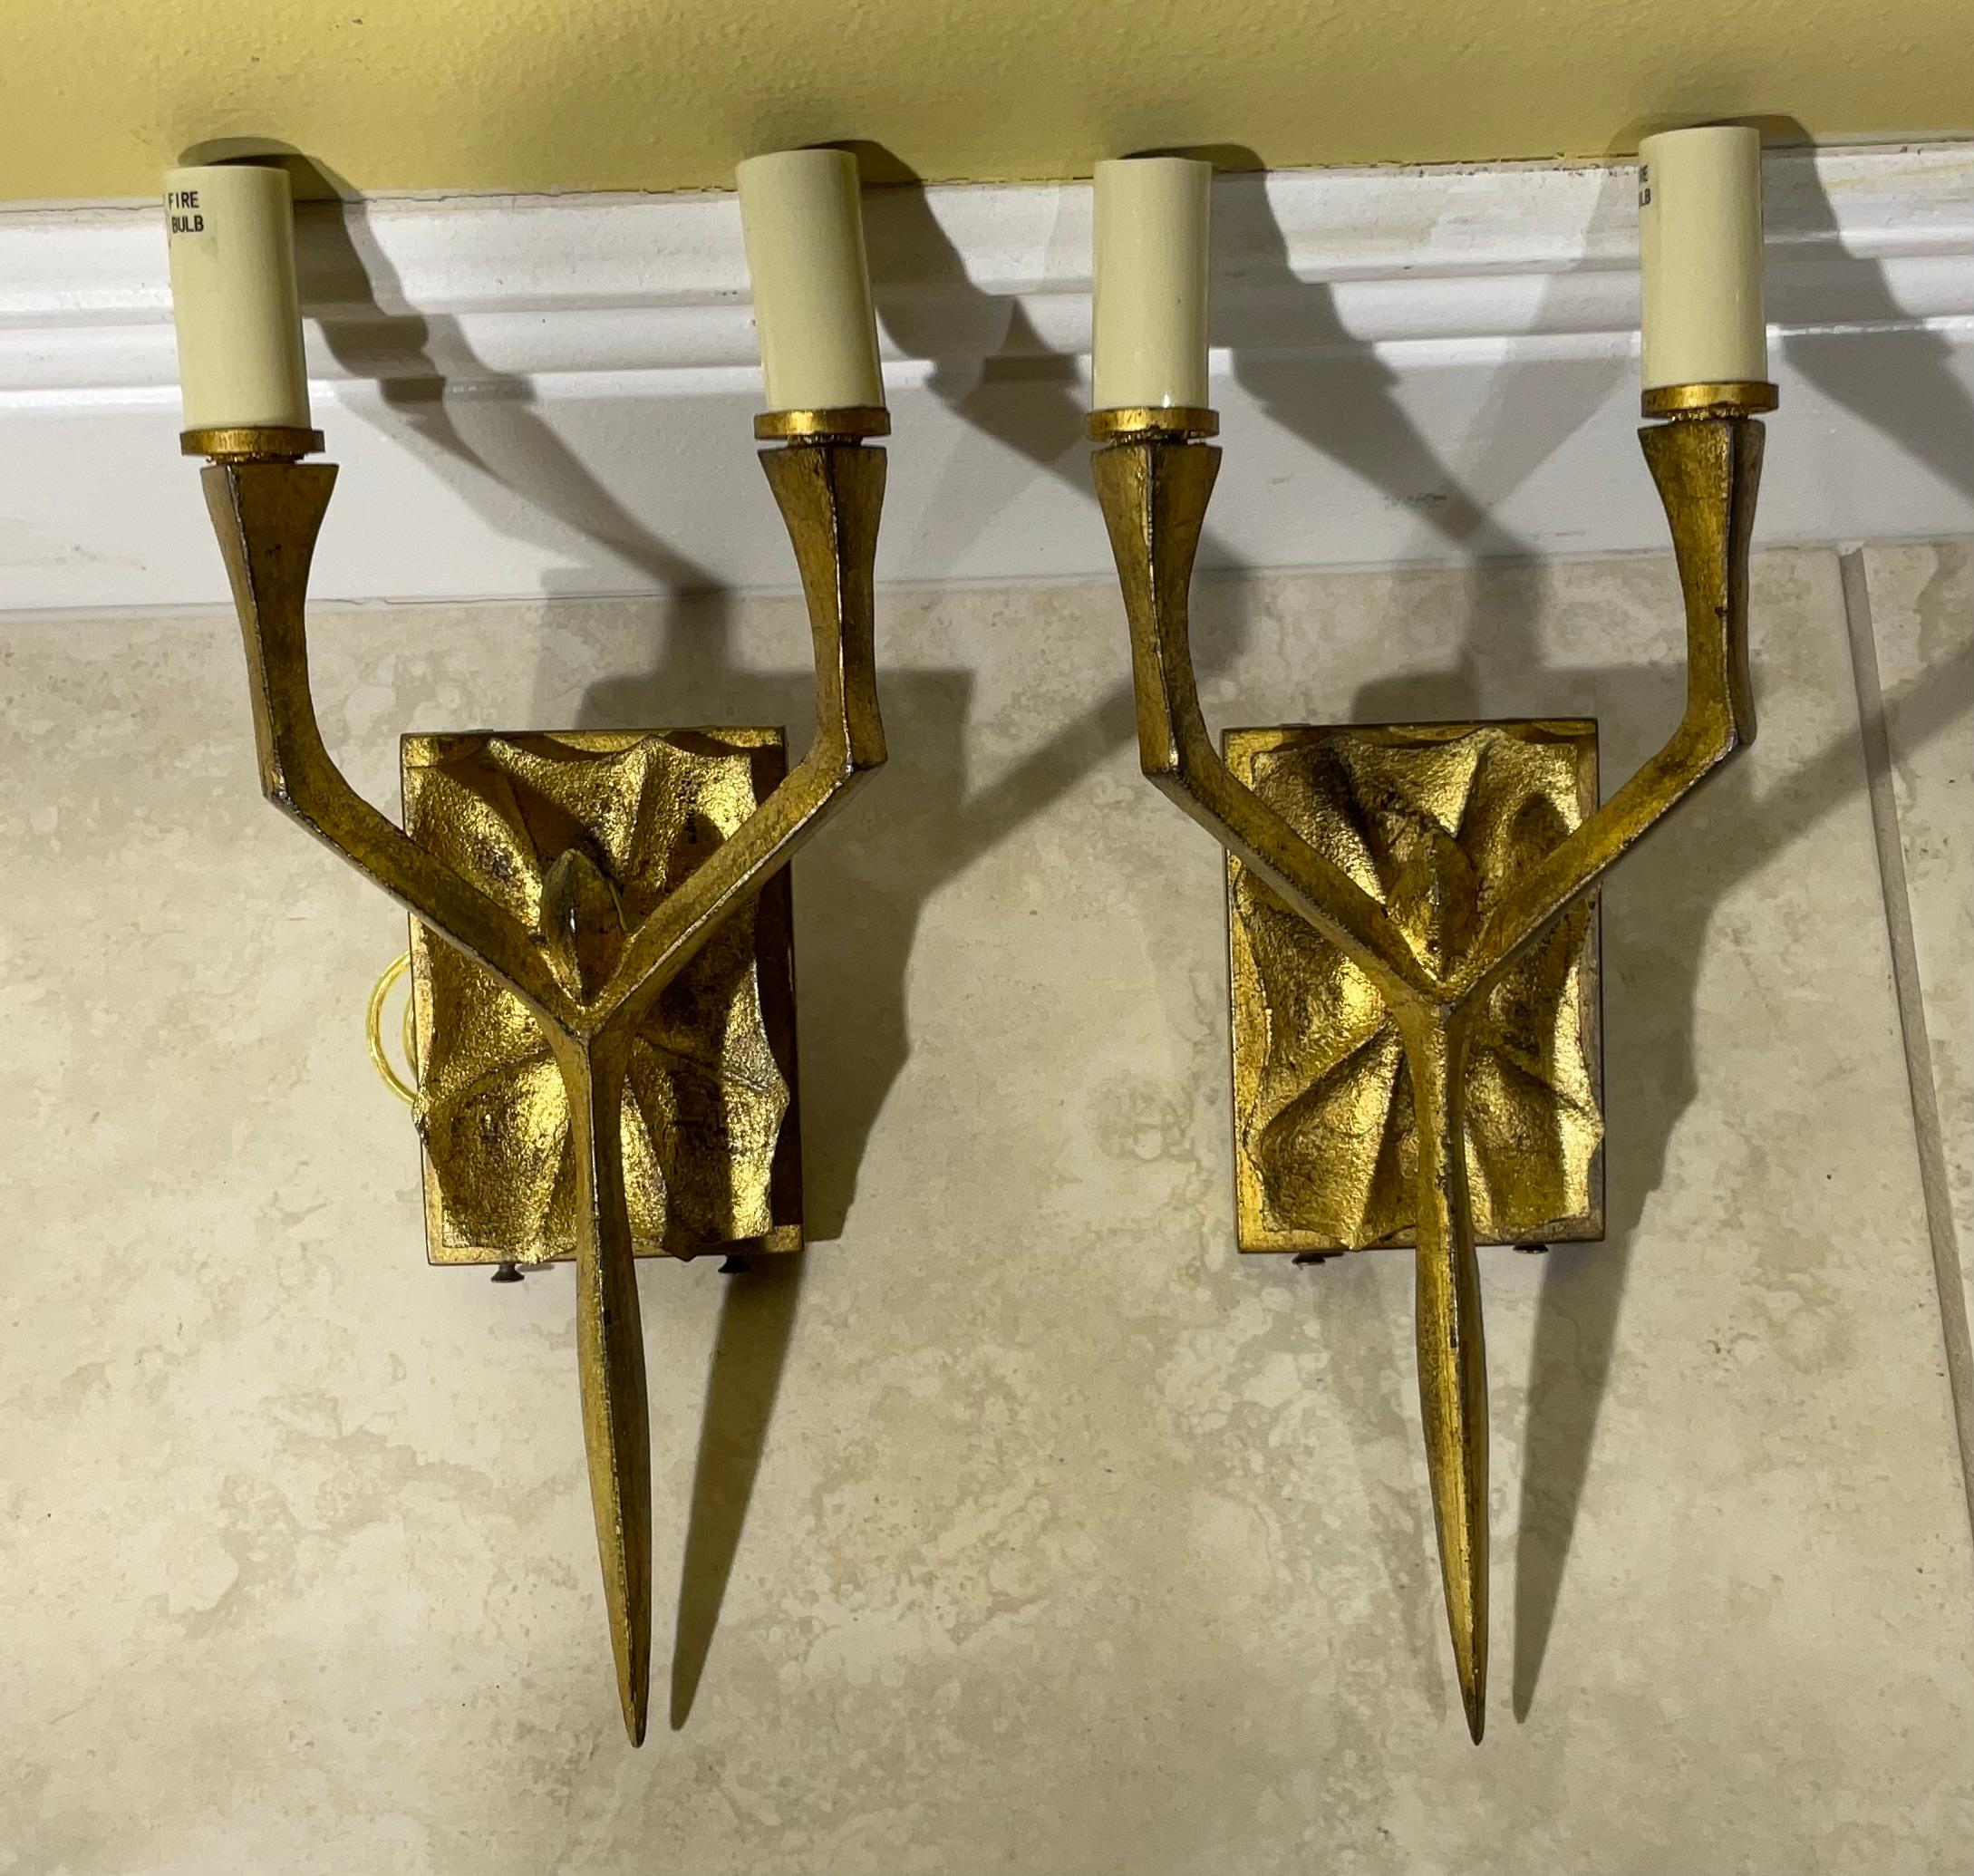 Pair of brutalist style wall sconces made of hand crafted iron , gold leaf color with two 60/watt light each . High quality craftsmanship, wired to fit US standards.